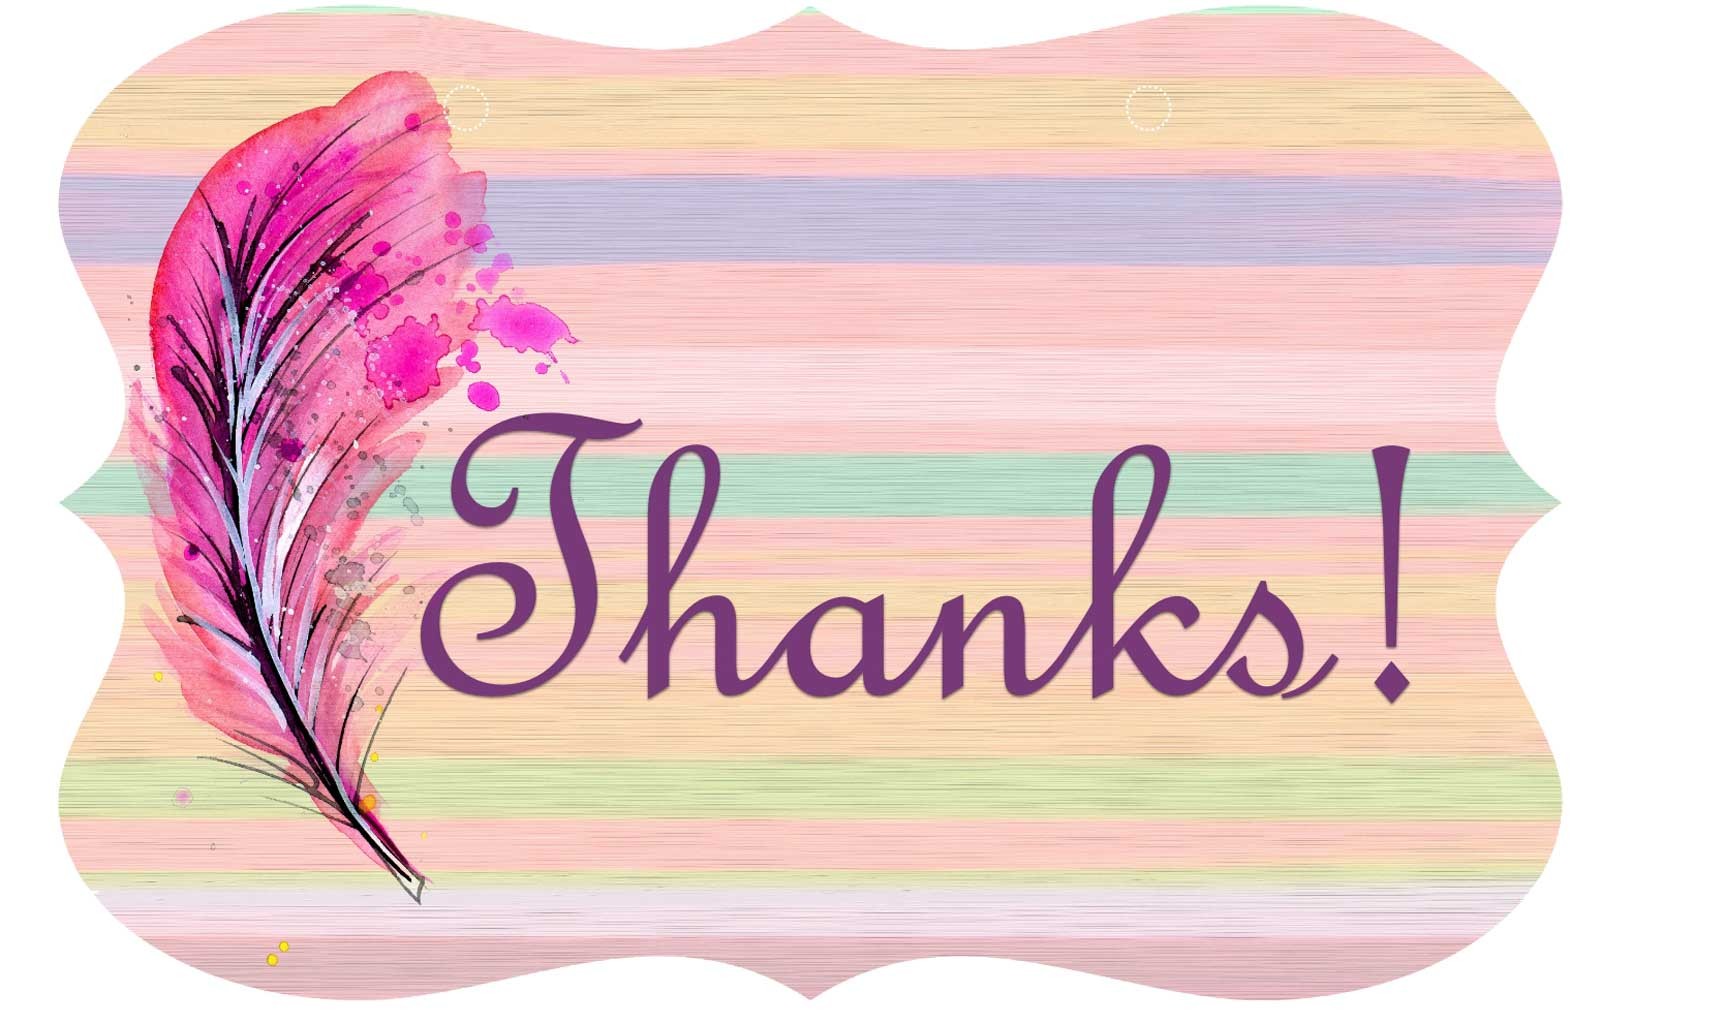 22 Thank You Friend Poems - Poems for Saying Thank You to True Friends